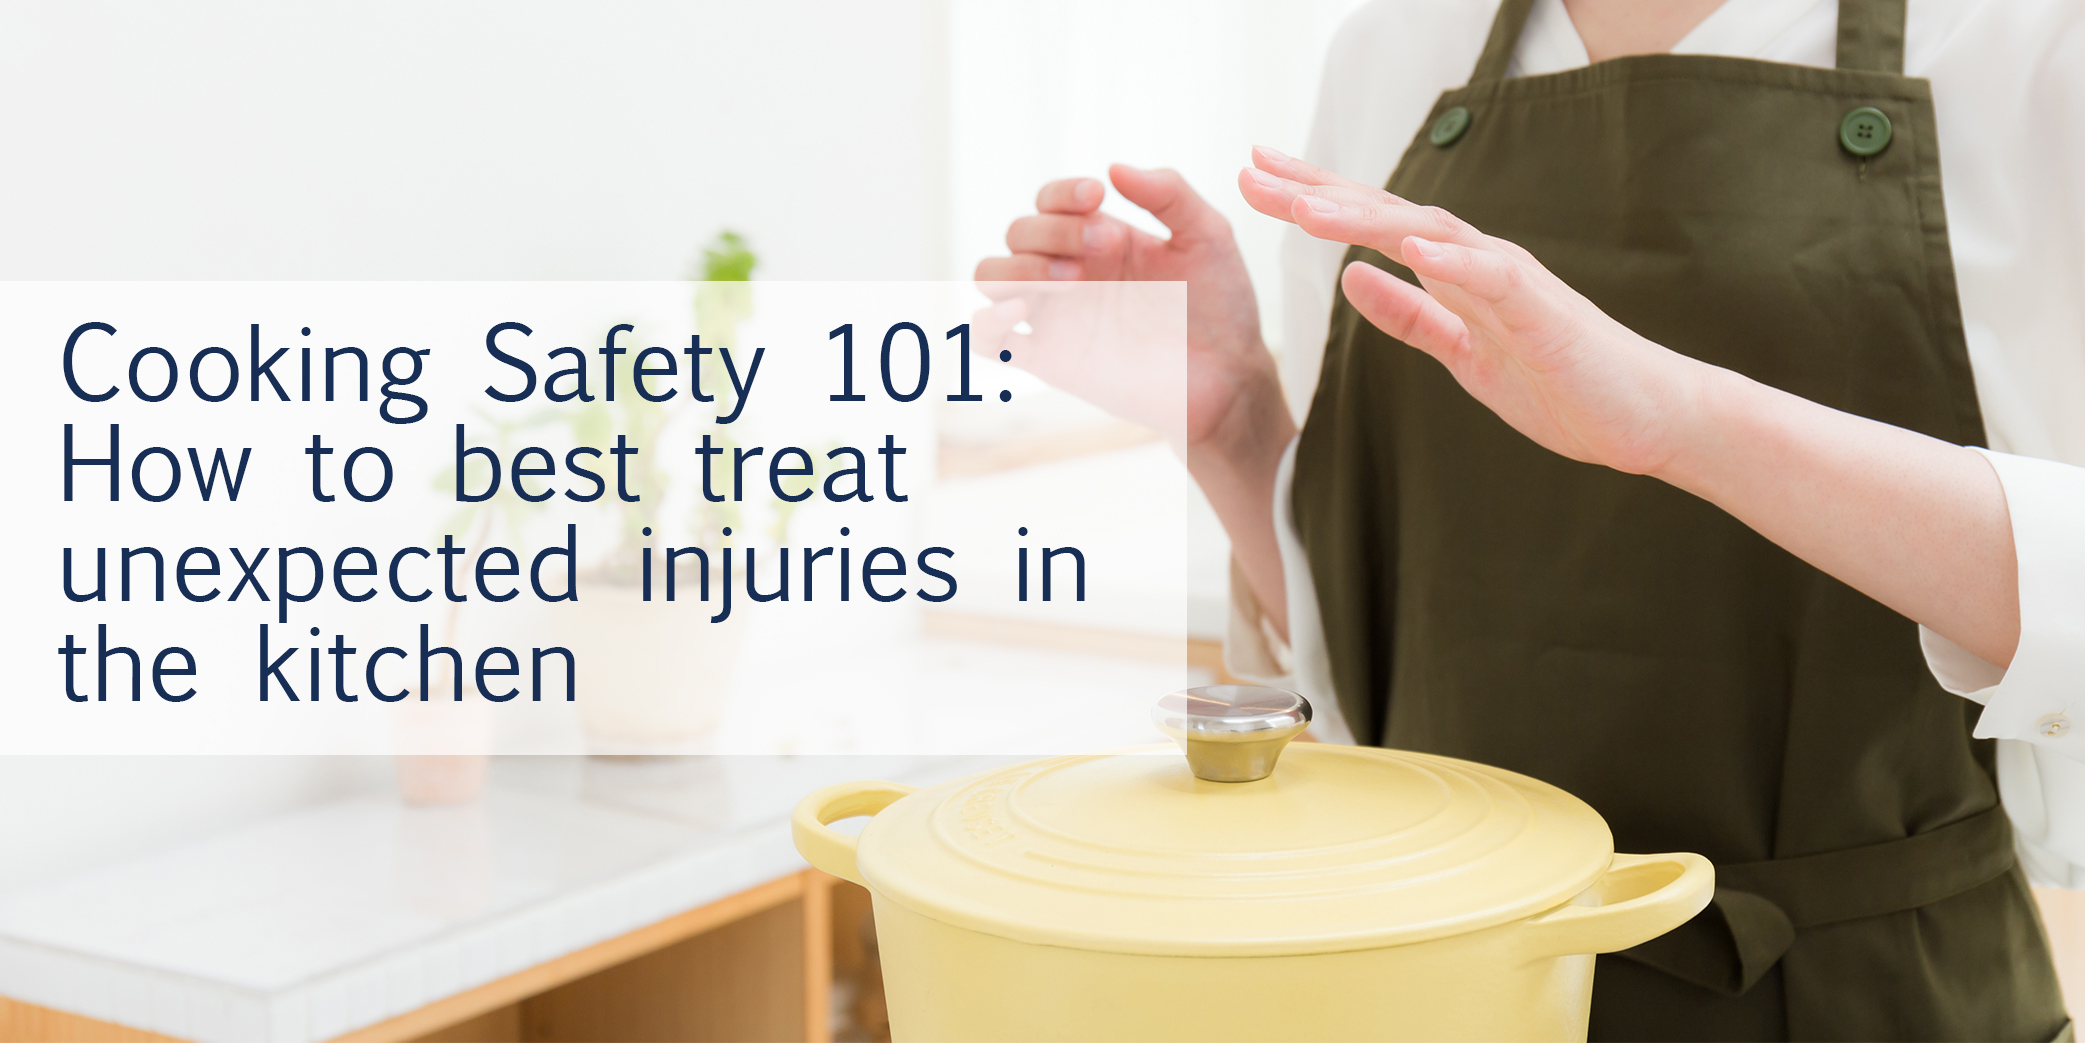 Cooking Safety 101: How to best treat unexpected injuries in the kitchen